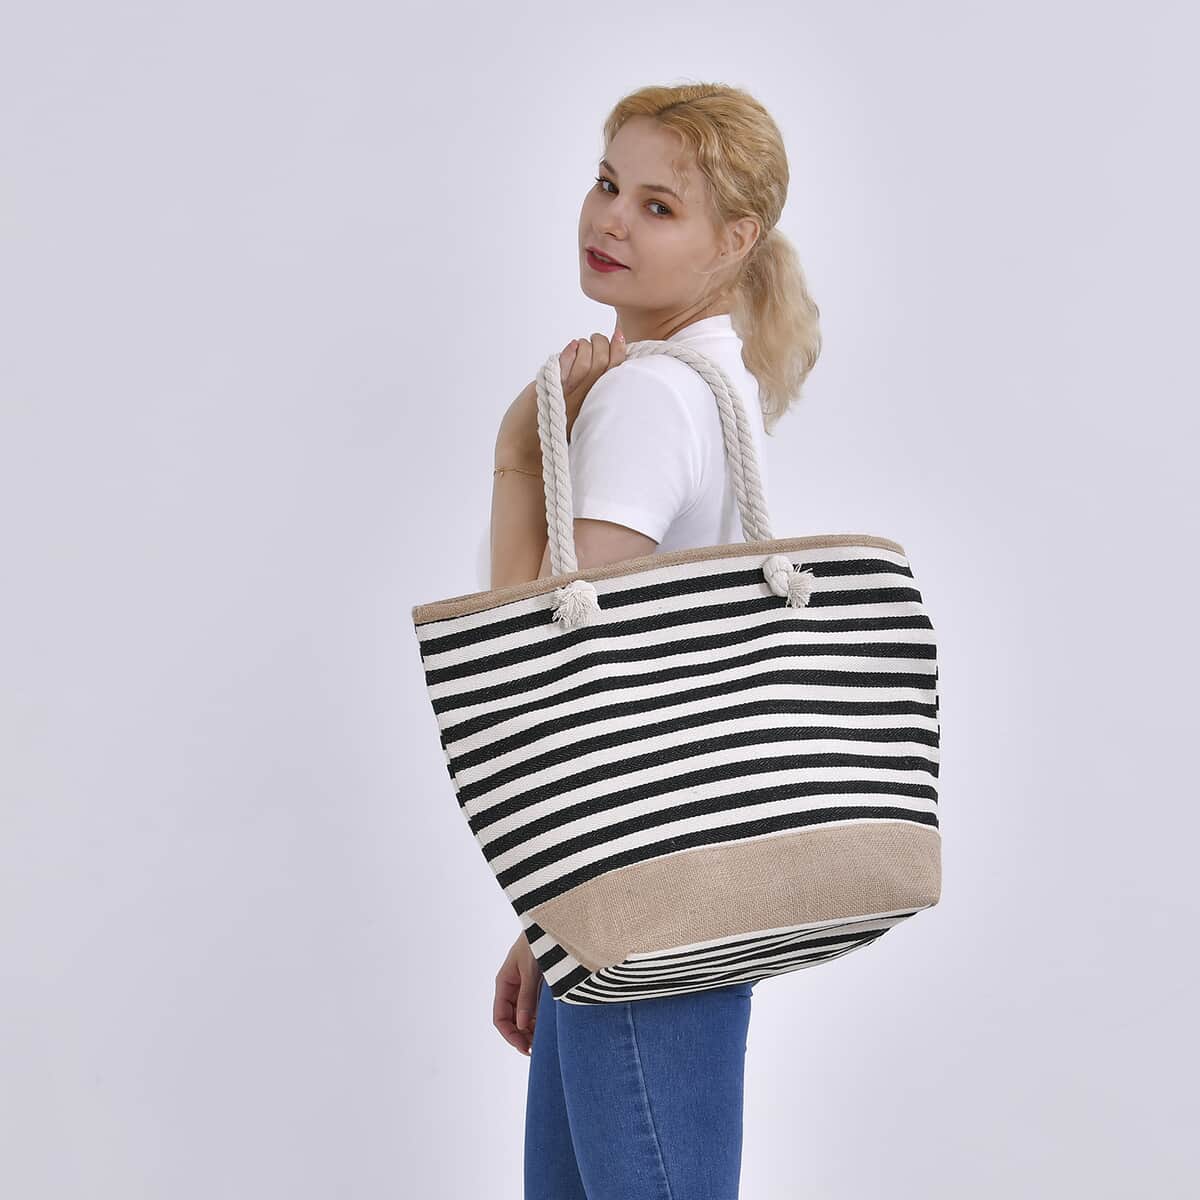 Black and White Stripes Polyester and Jute Tote Bag (12"x8.7"x15") image number 1